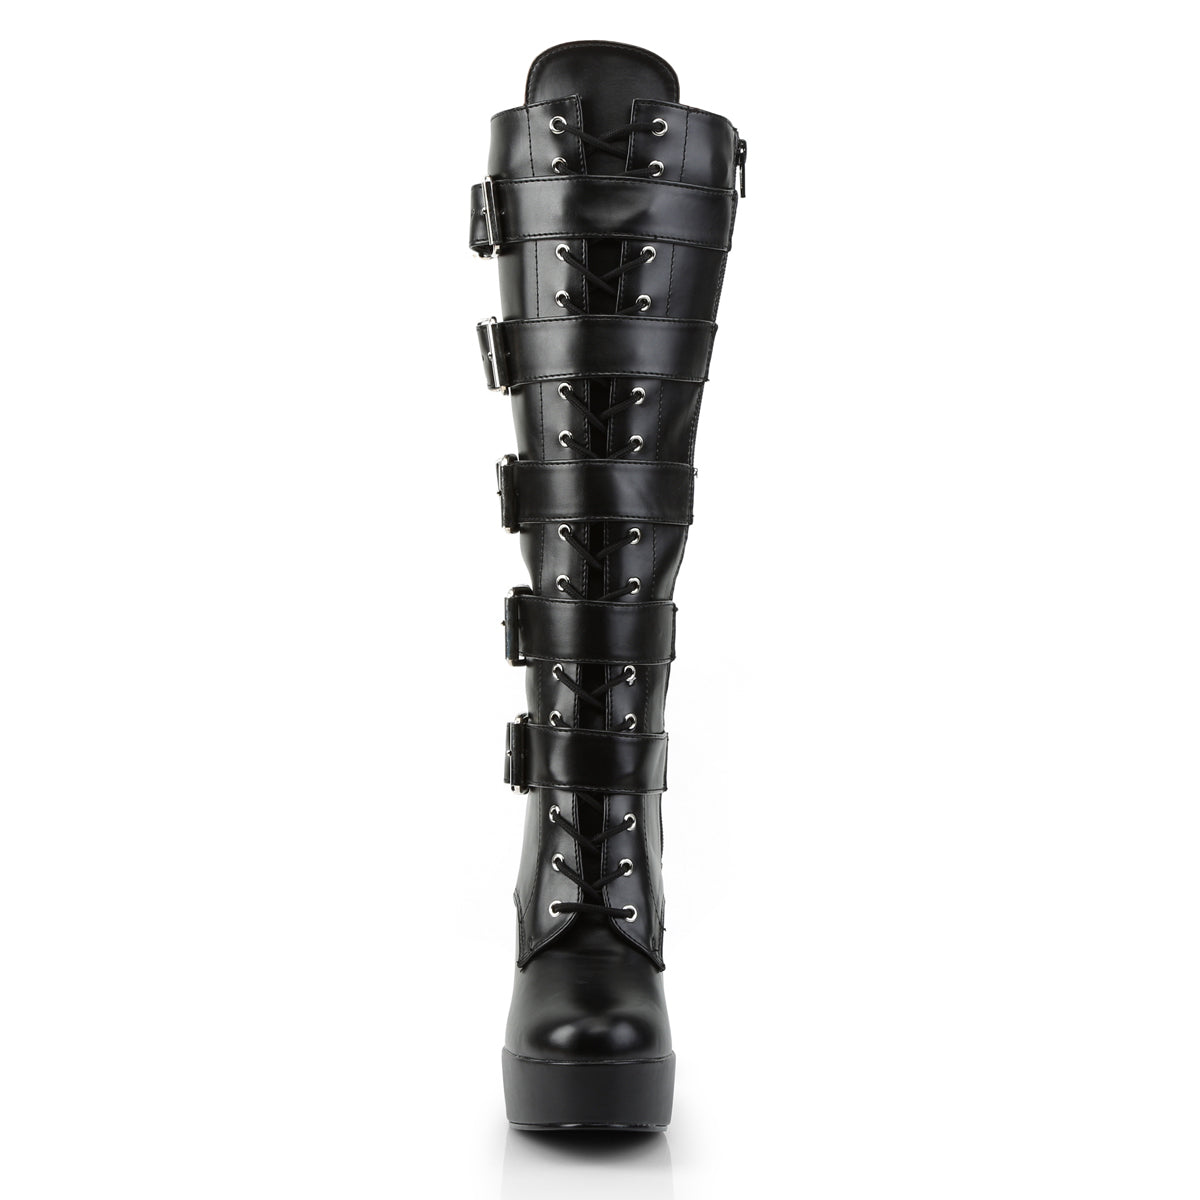 Pleaser Womens Boots ELECTRA-2042 Blk Faux Leather